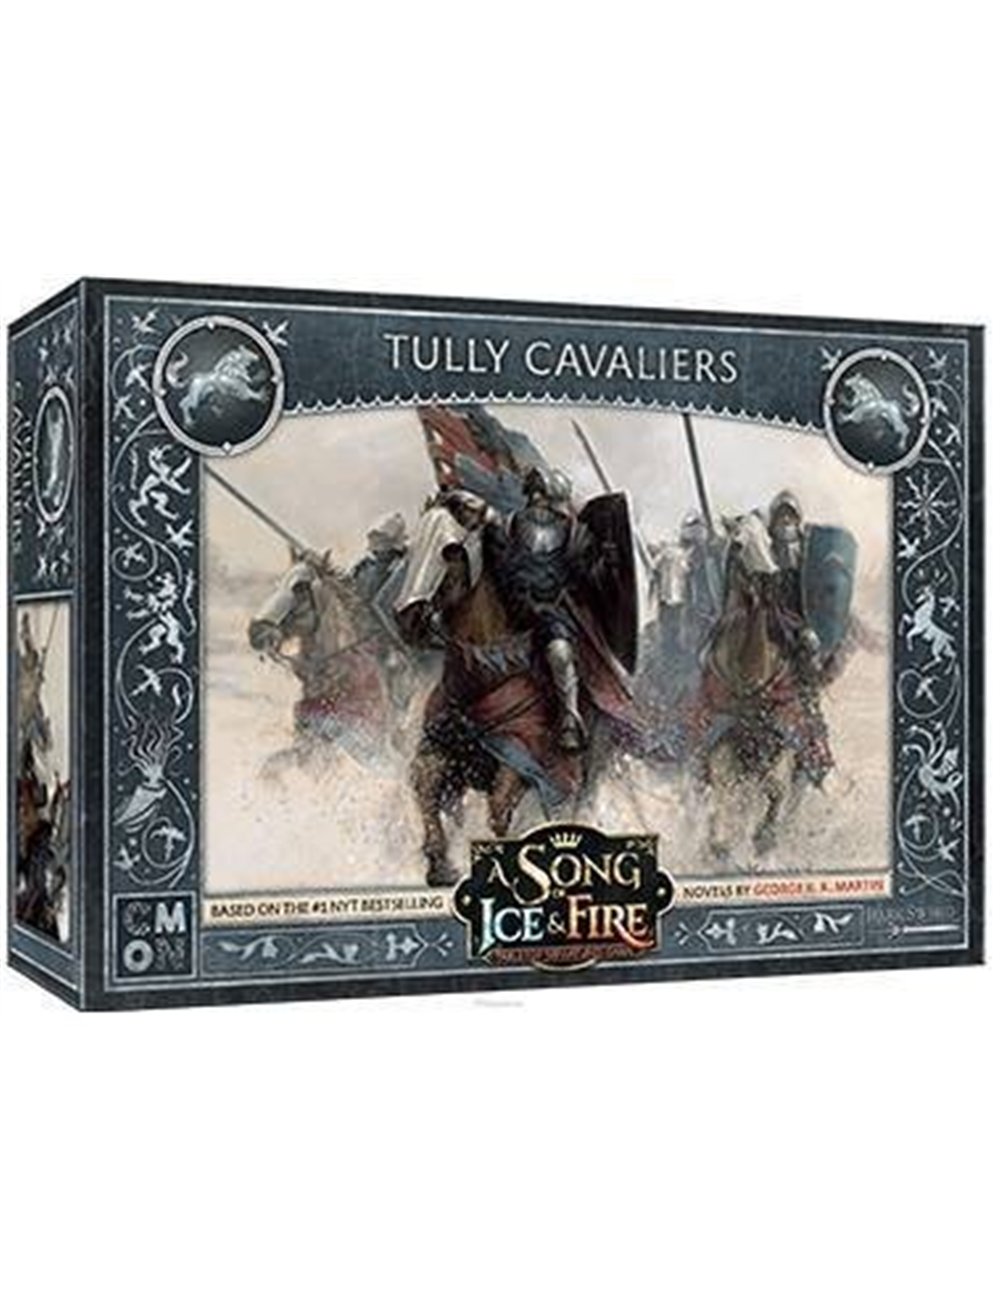 A SONG OF ICE & FIRE - Tully Cavaliers PL